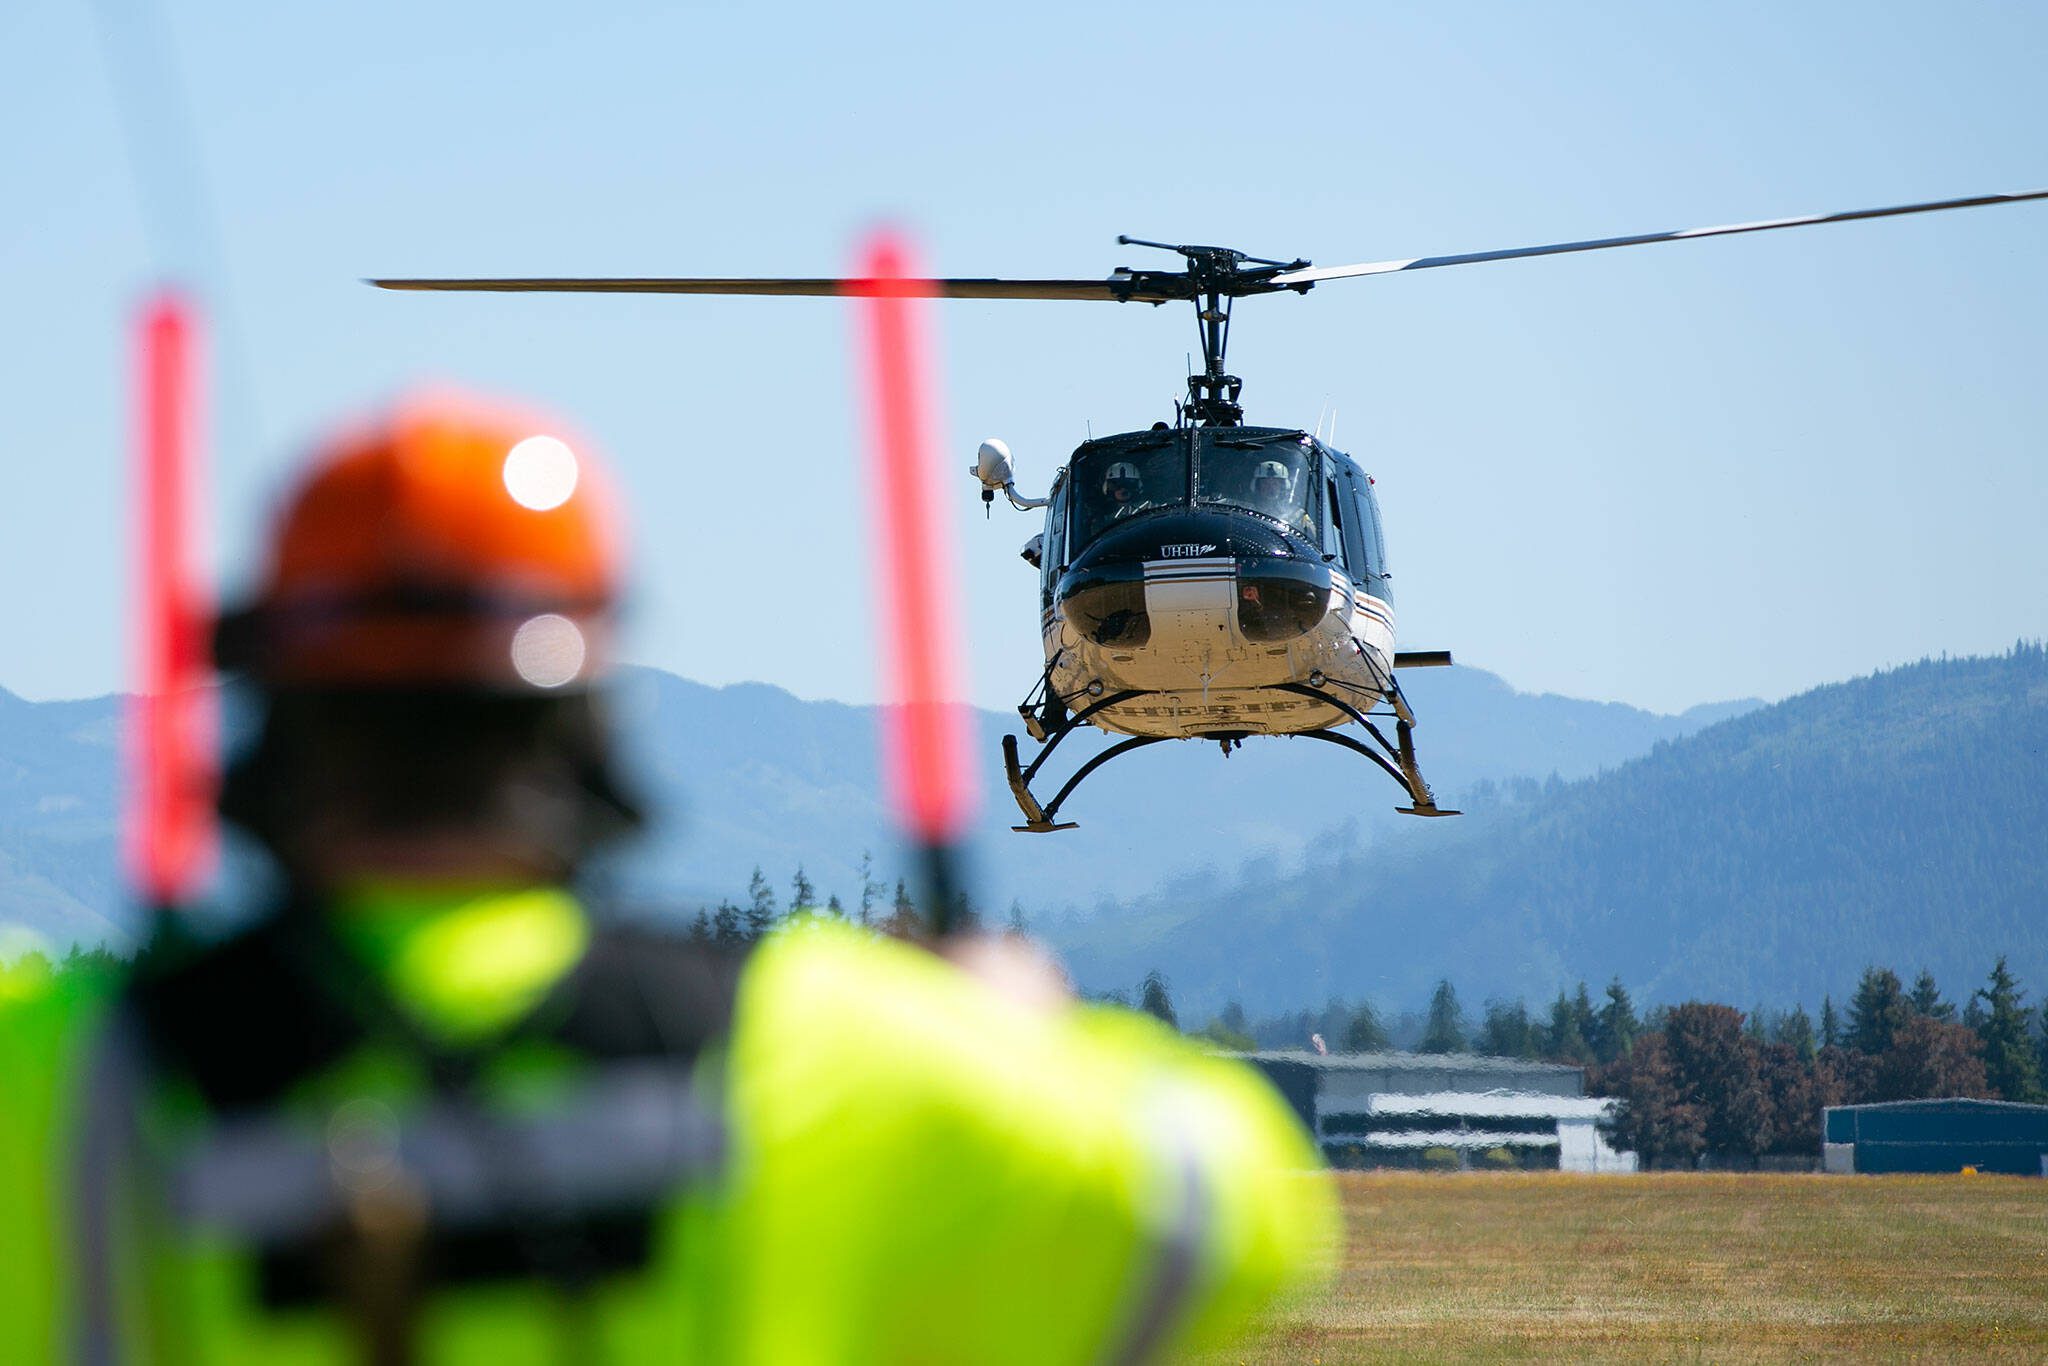 The flight crew from Snohomish County Volunteer Search and Rescue land in a field during an interagency disaster response training exercise at Arlington Municipal Airport on Tuesday, June 6, 2023, in Arlington, Washington. (Ryan Berry / The Herald)